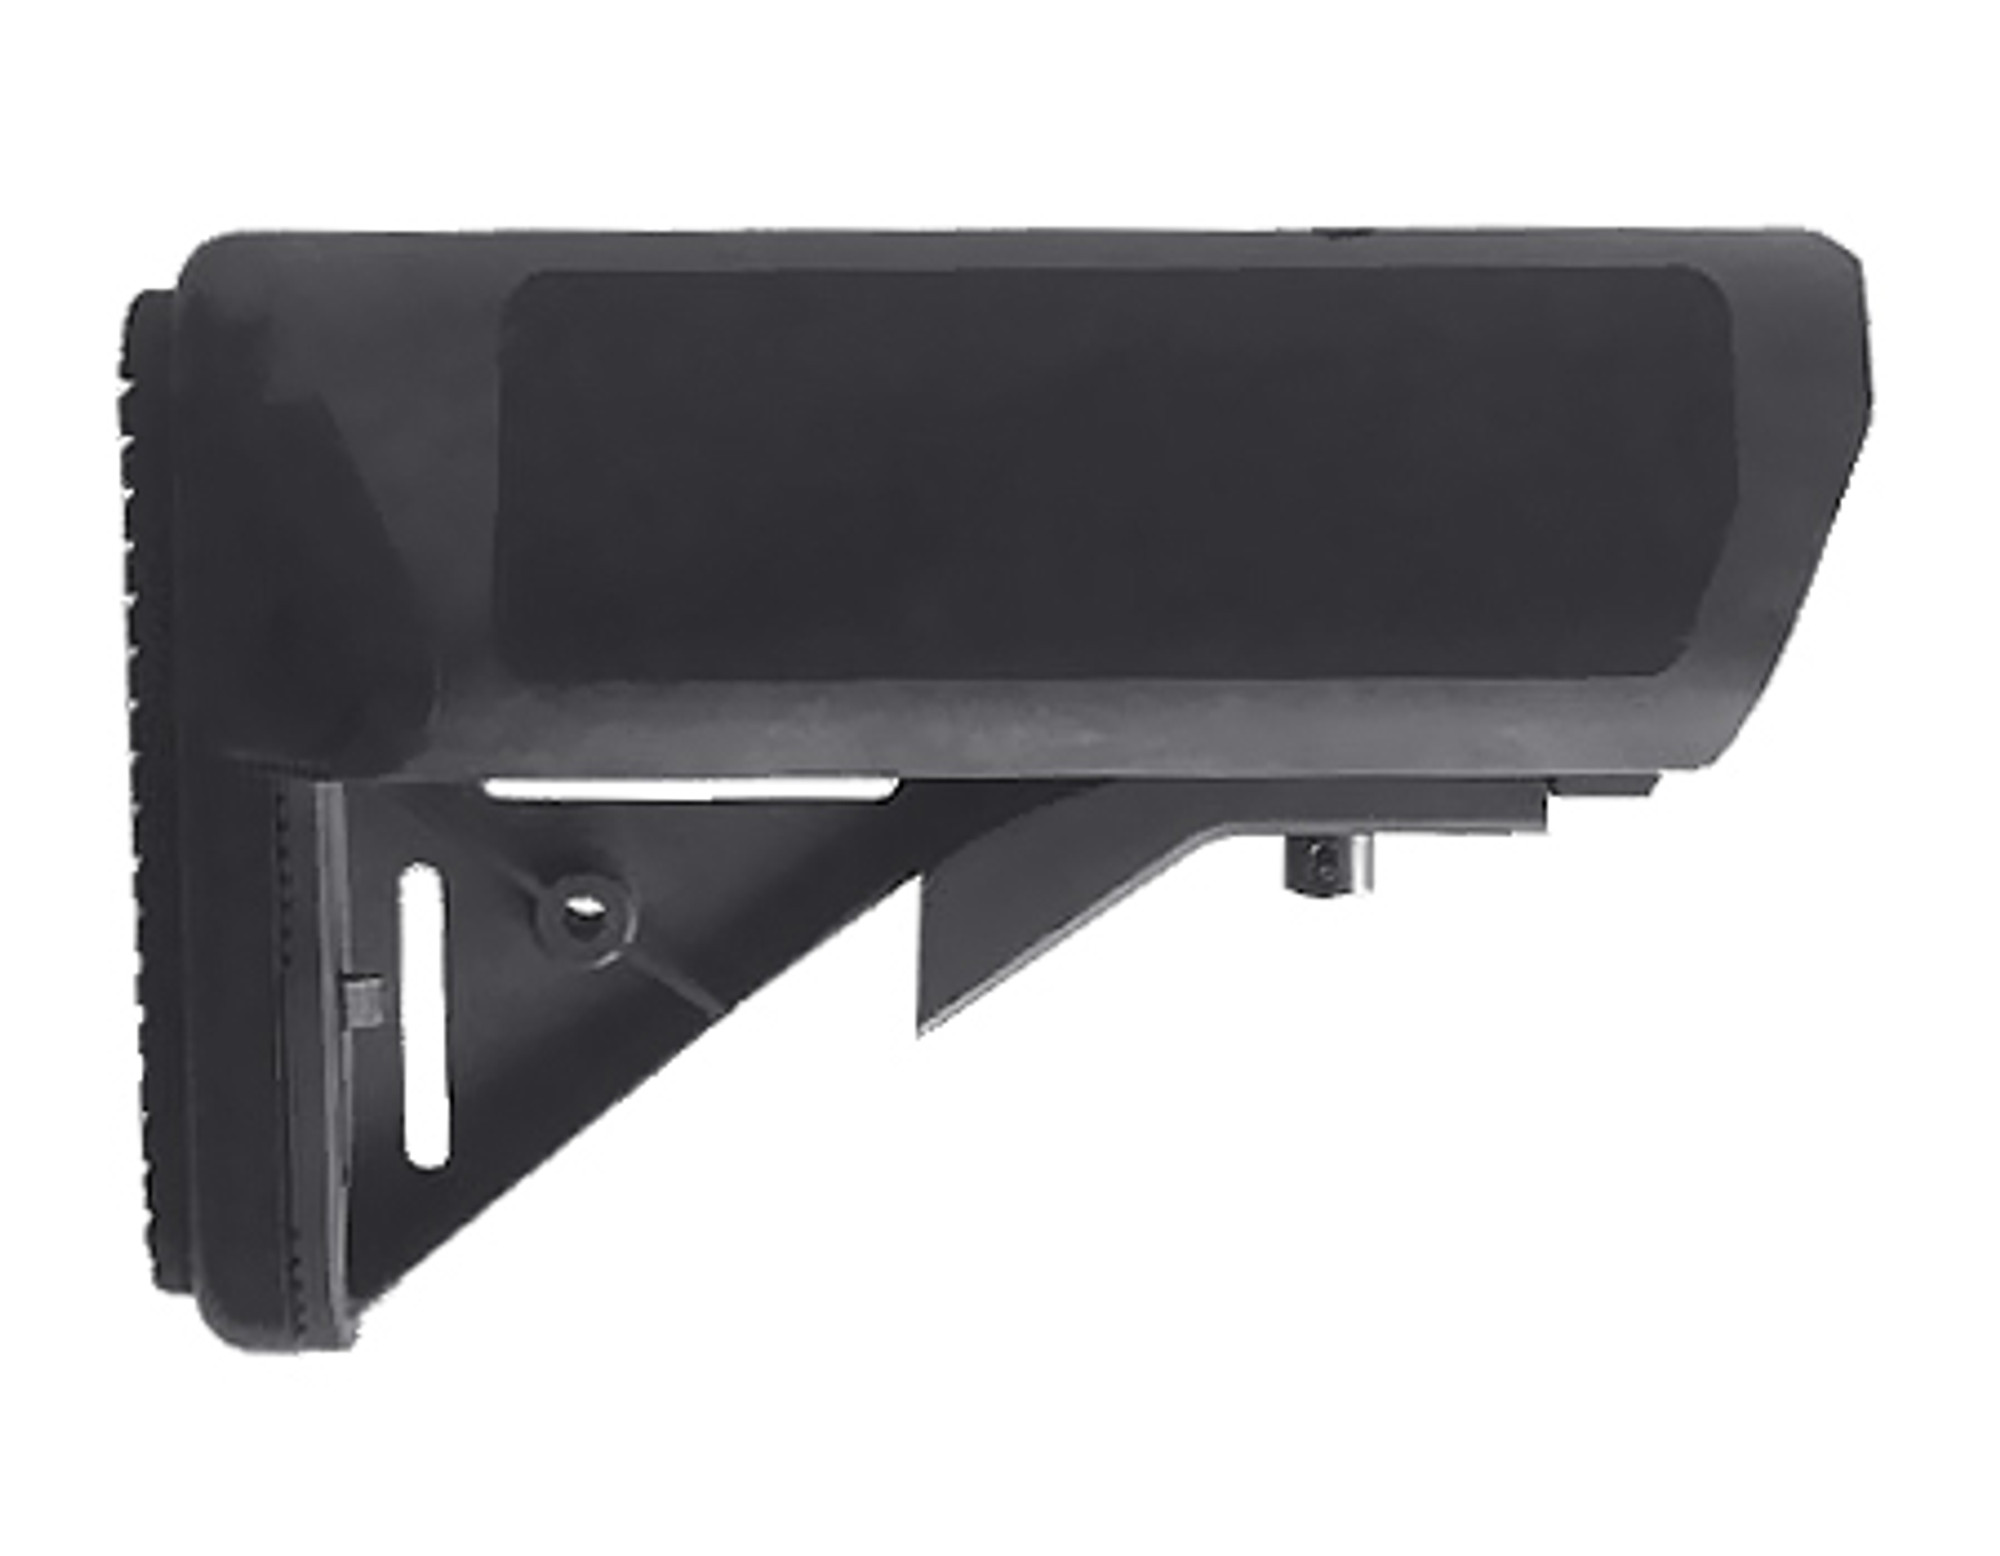 Celcius Technology Replacement Slide Stock Assembly for Celcius CTW M4/CQB Series